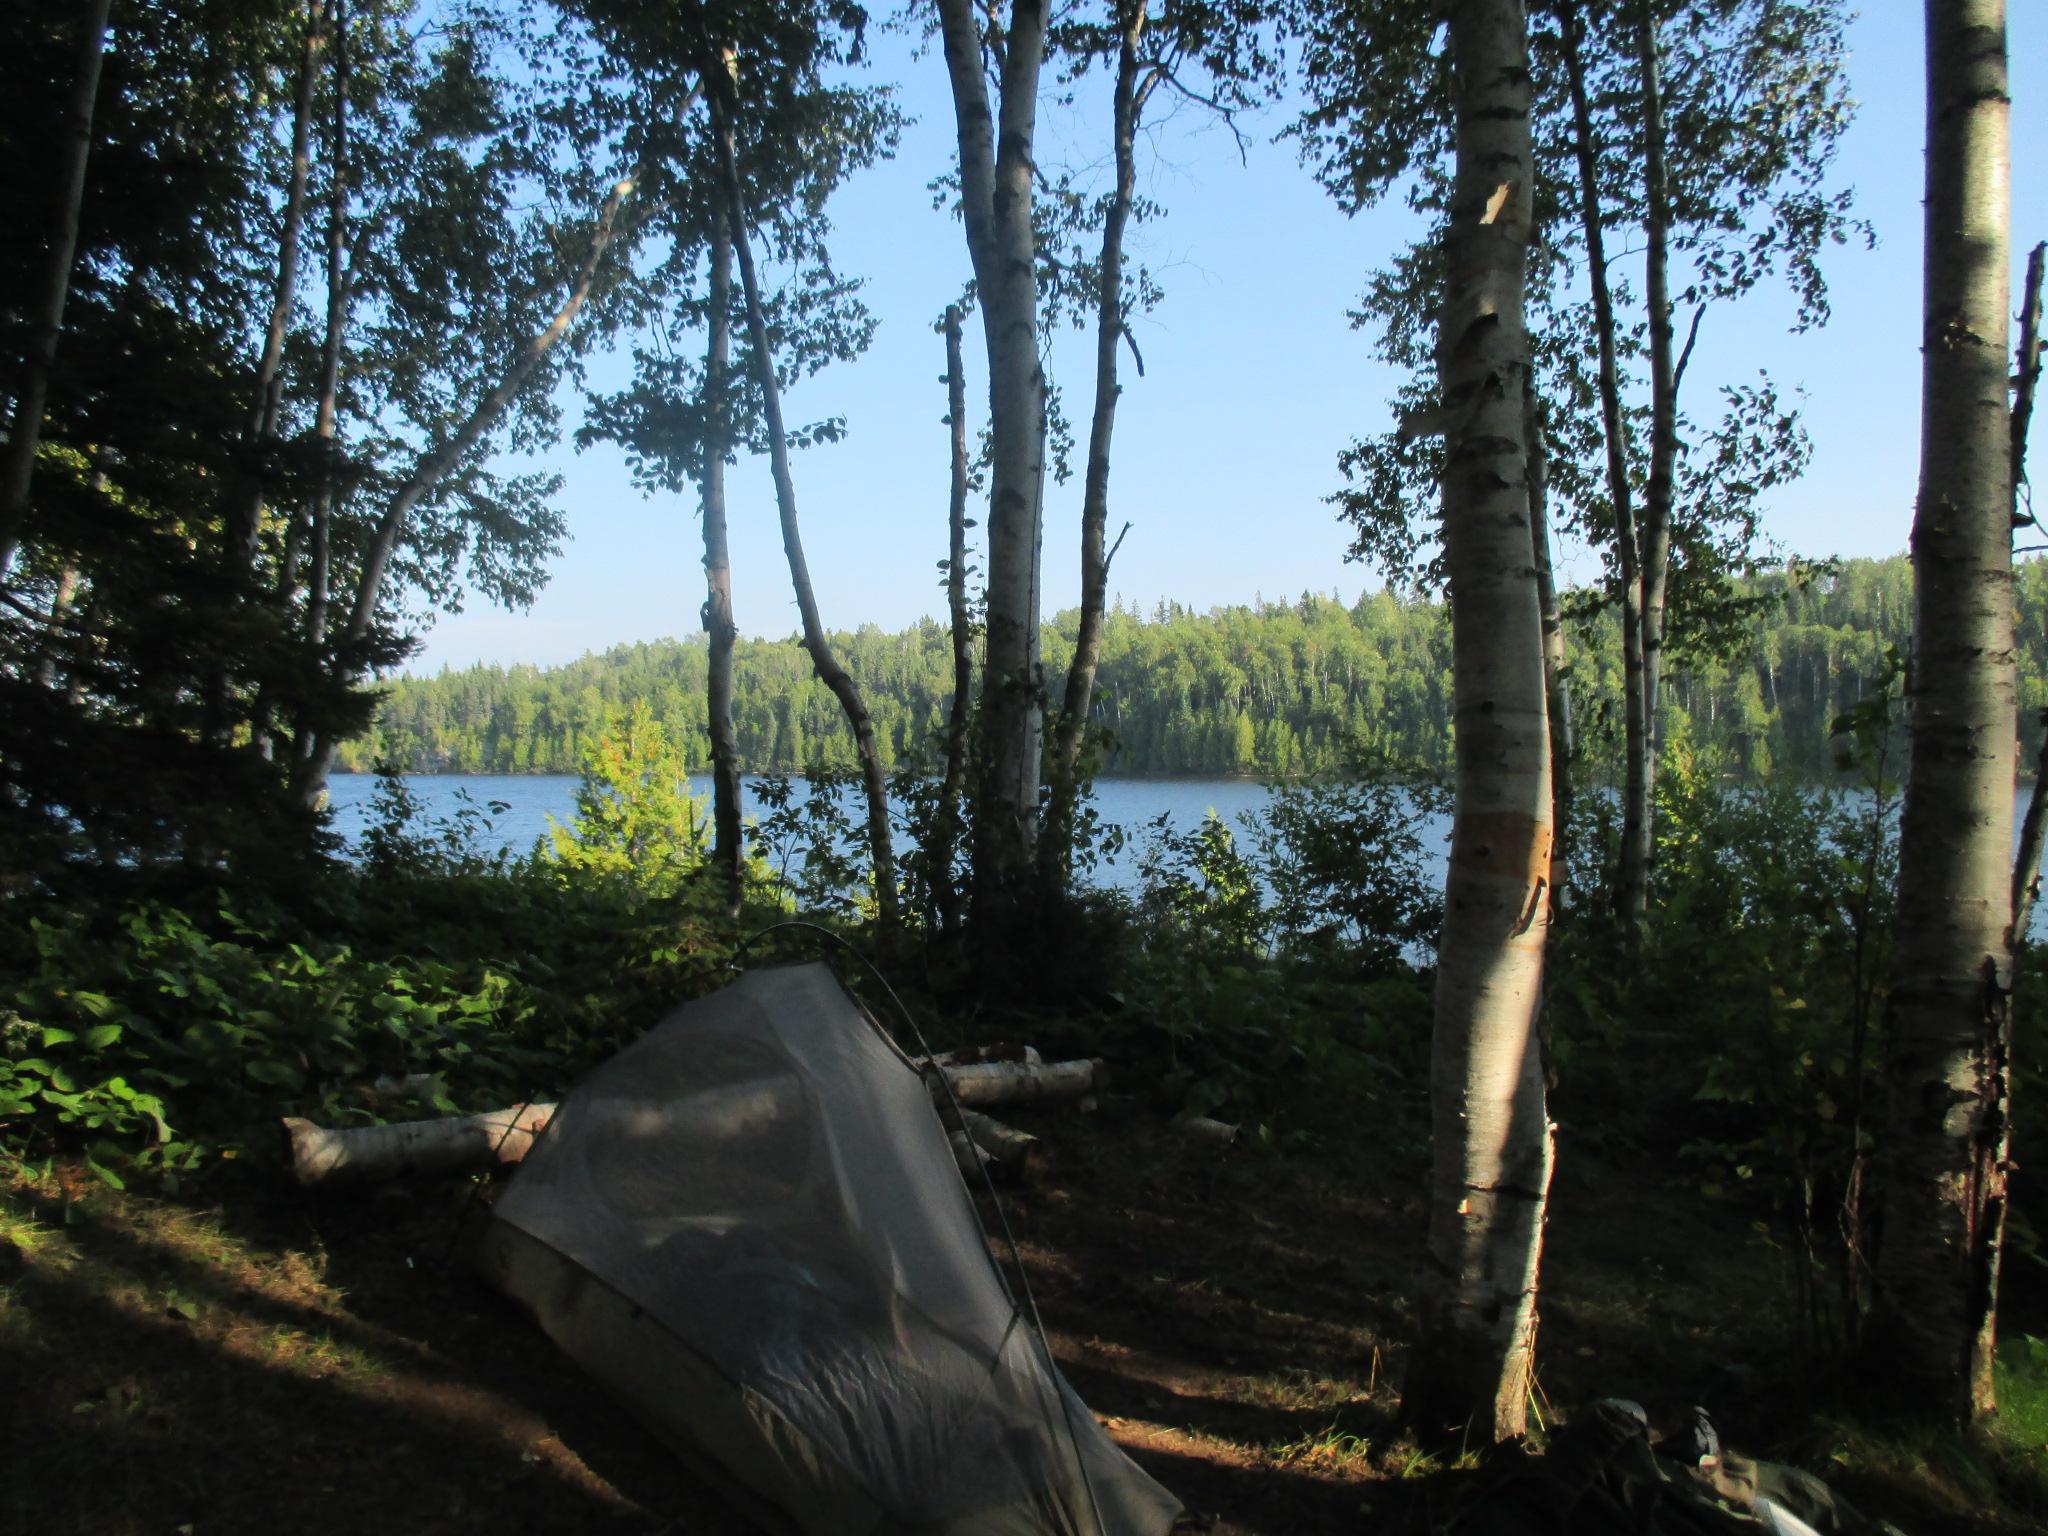 Tent in shadow beneath trees with lake in the distance.